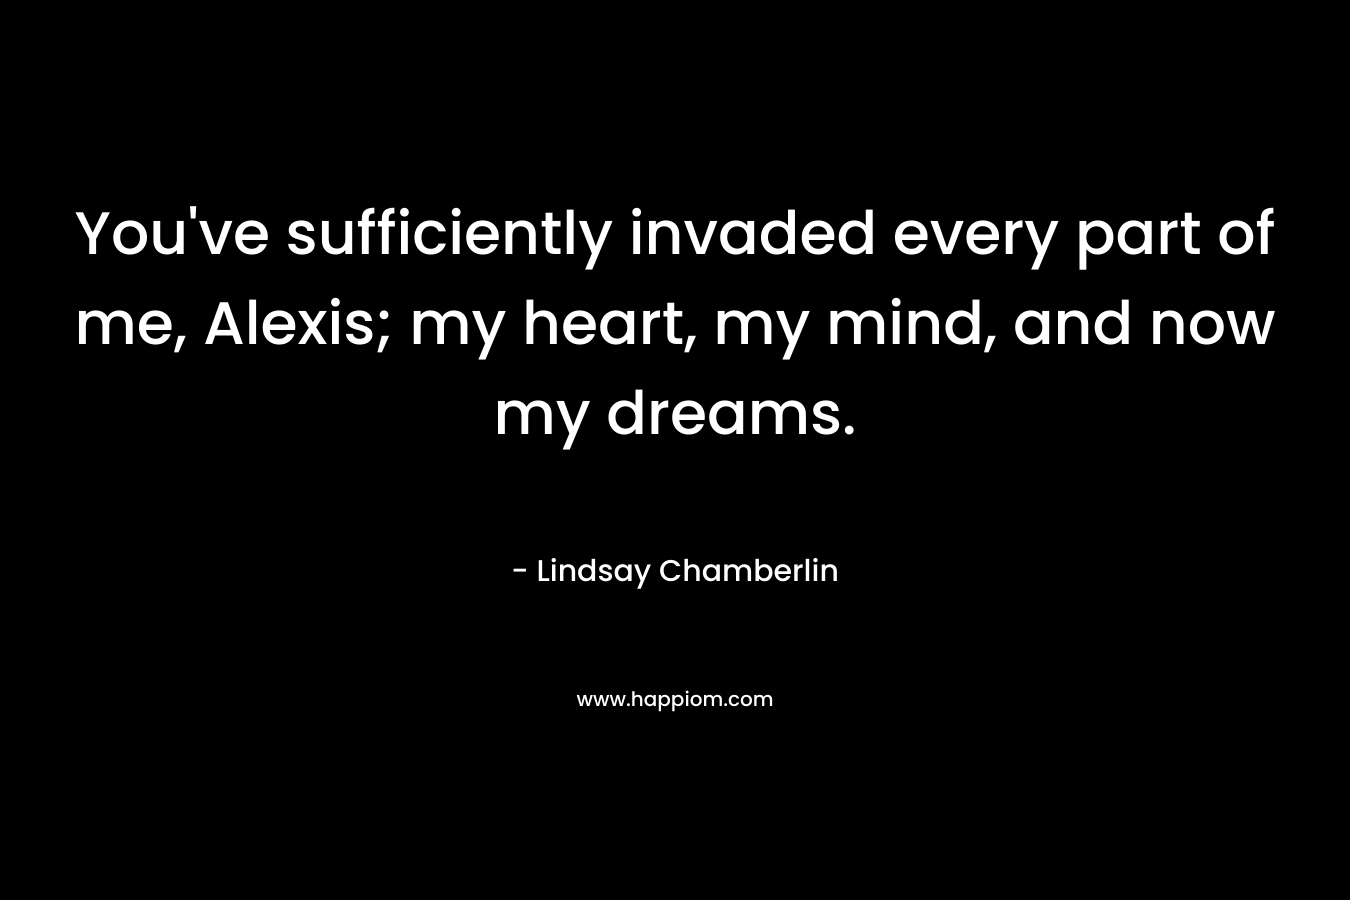 You've sufficiently invaded every part of me, Alexis; my heart, my mind, and now my dreams.